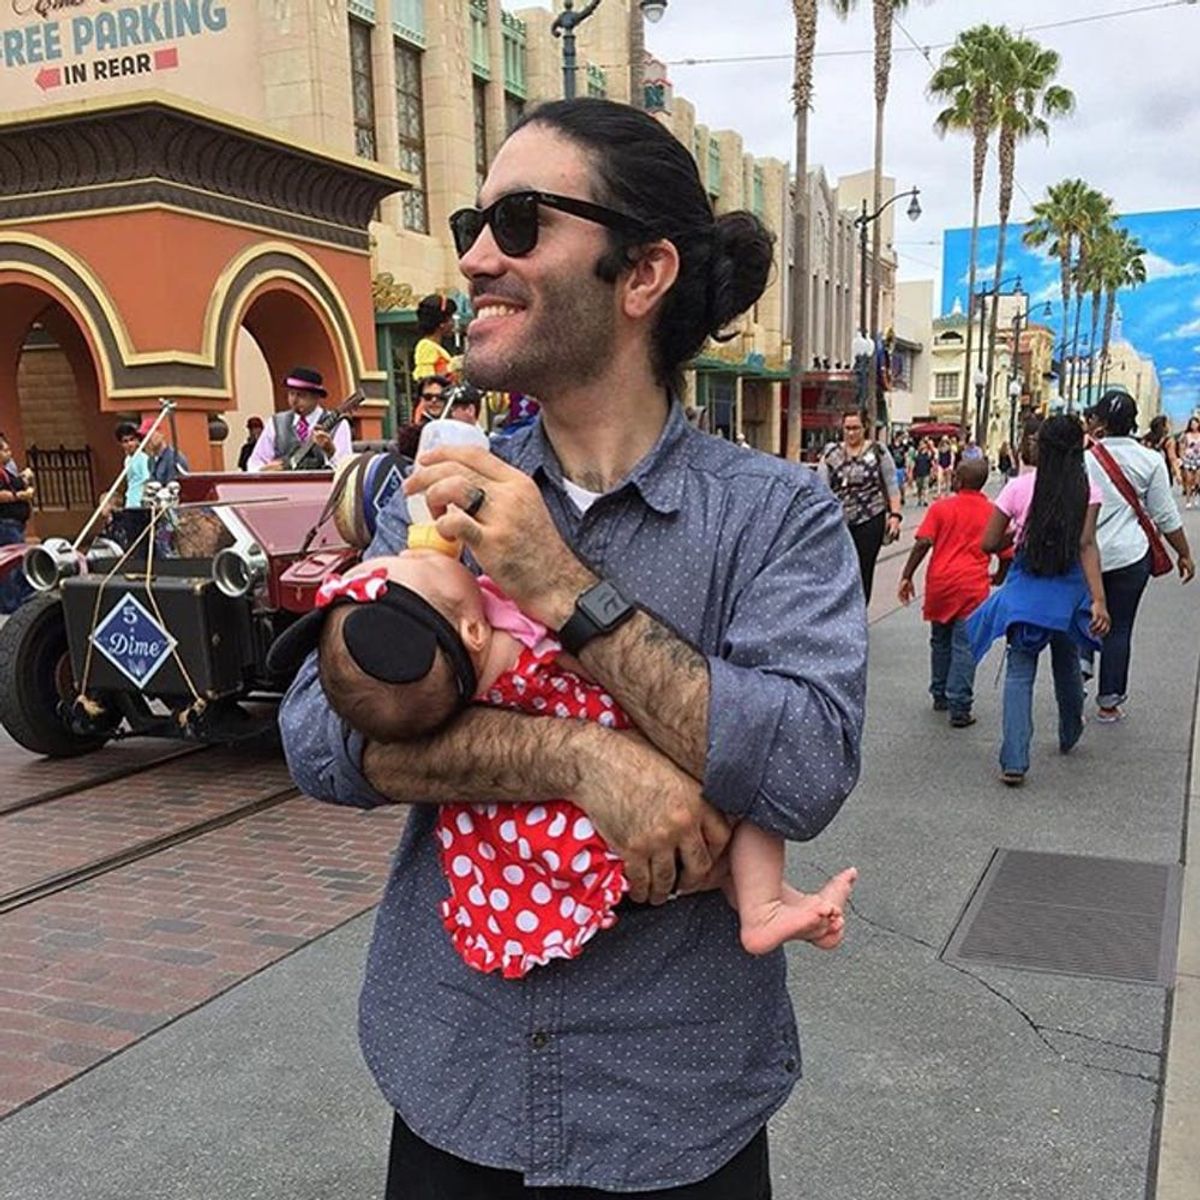 Man Buns of Disneyland, A Sweet New Podcast + More to Make Your Week Better